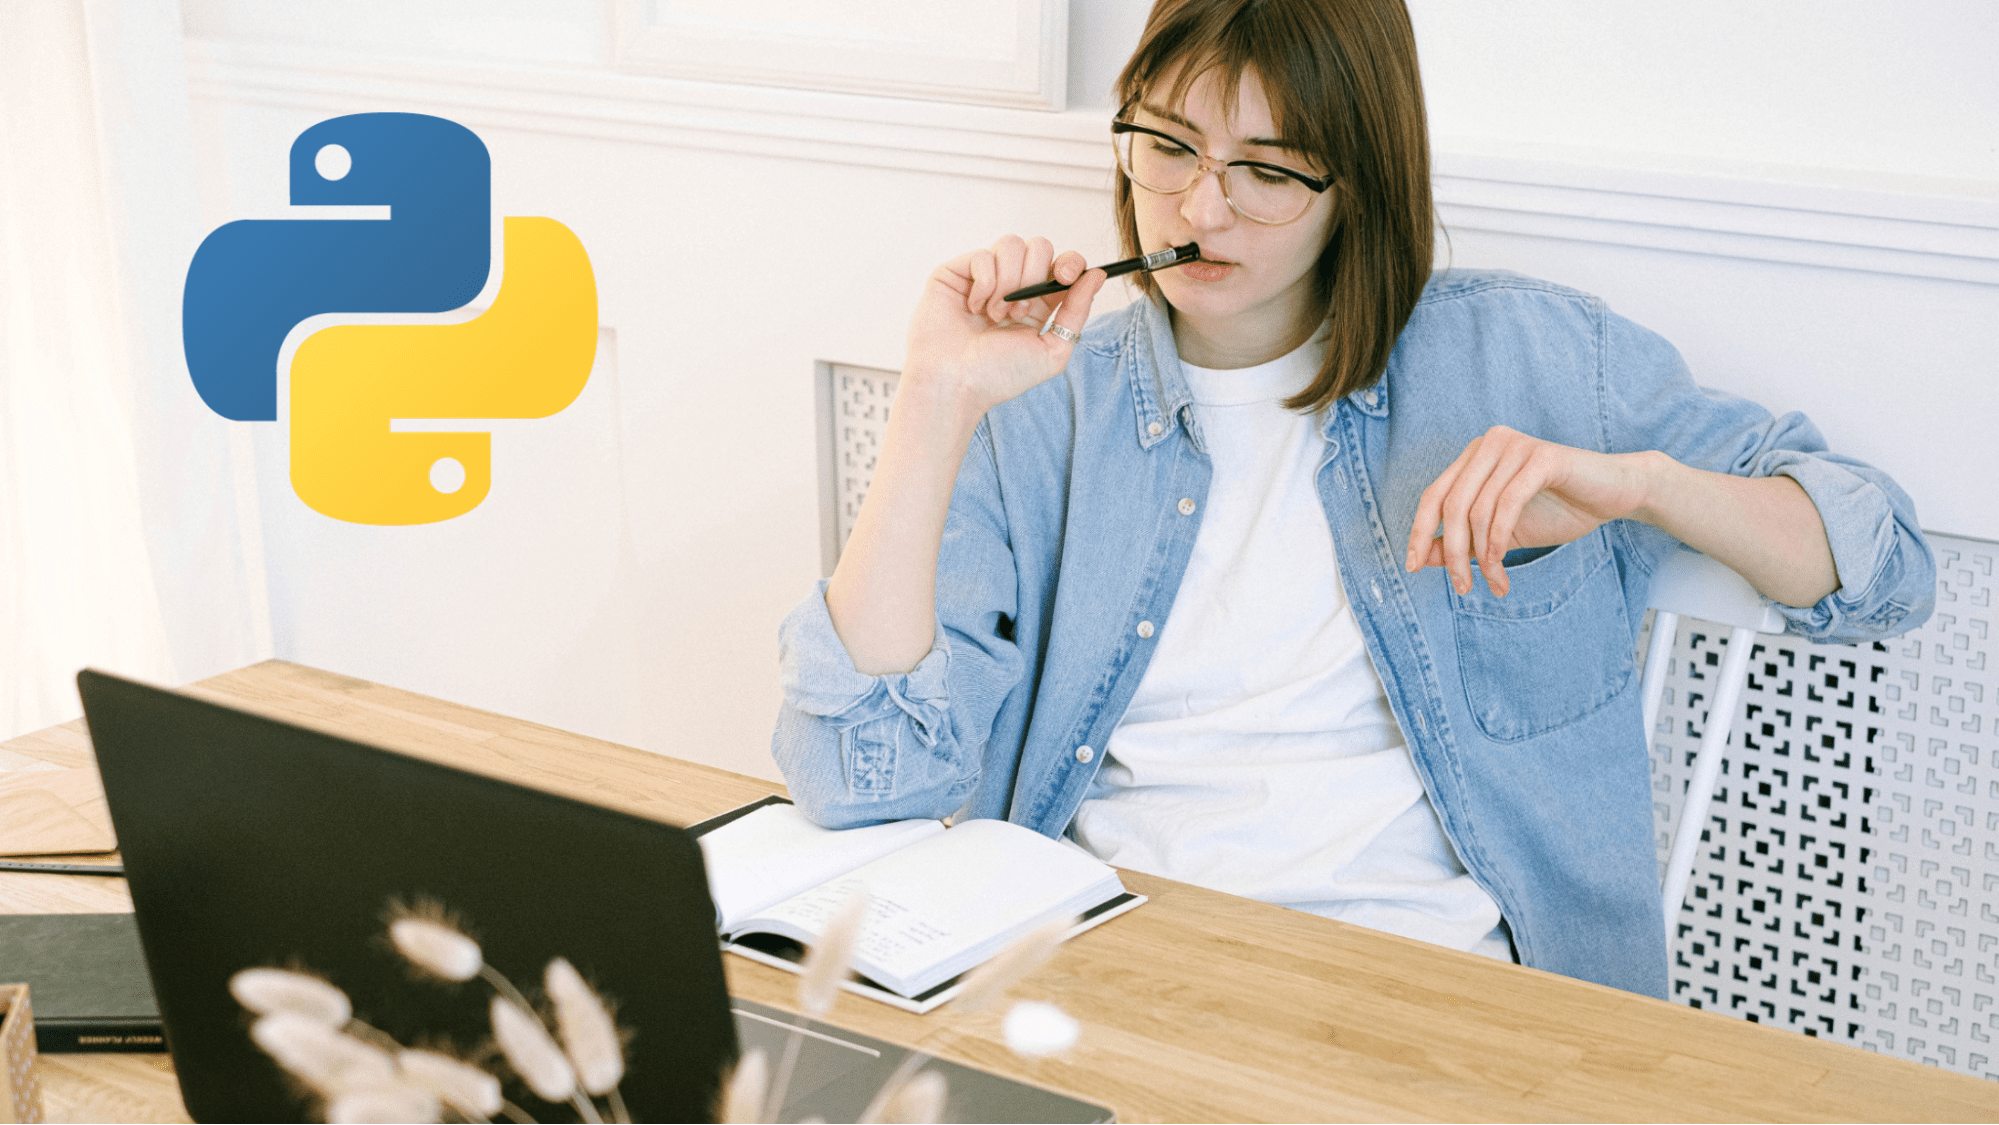 Which Certification in Python is the Best Fit for Me?